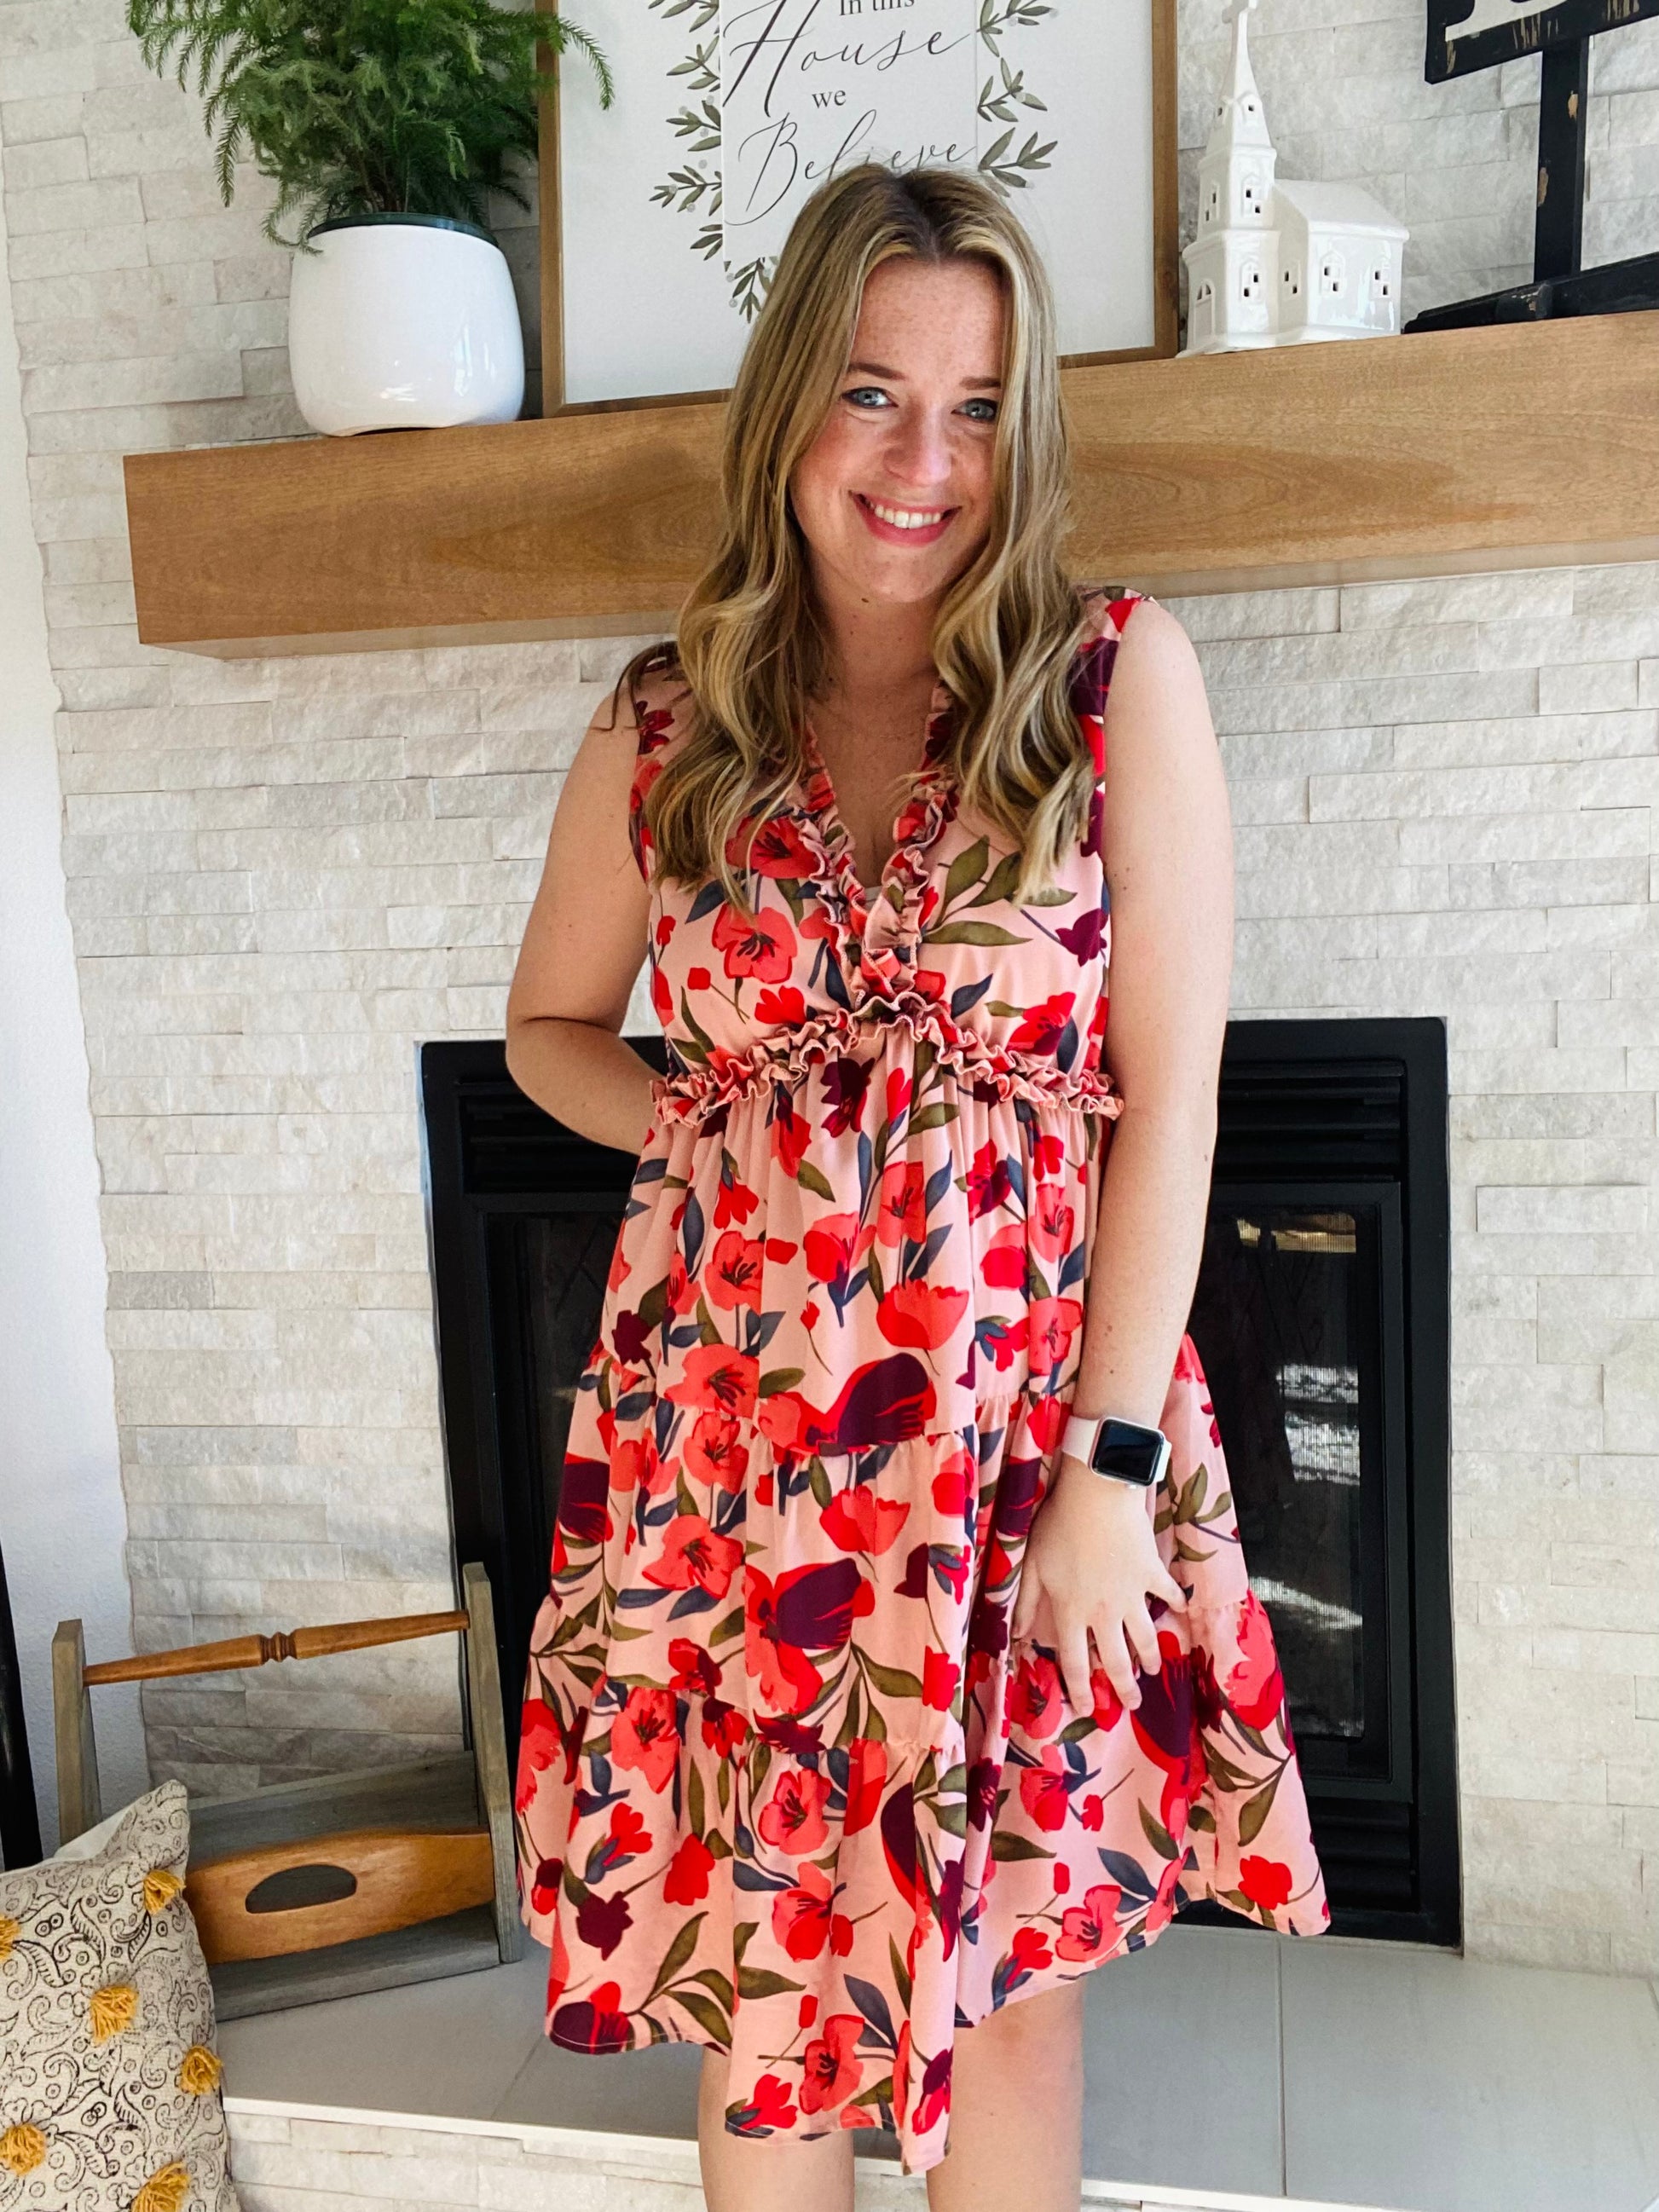 This Boho Floral Frill Sleeveless Dress is the perfect pick for summer. The V Neck accent complements the Boho style, while the red floral print and tiered fabric add a romantic feel. To complete the look, the A-line silhouette provides a flattering fit for all body types.